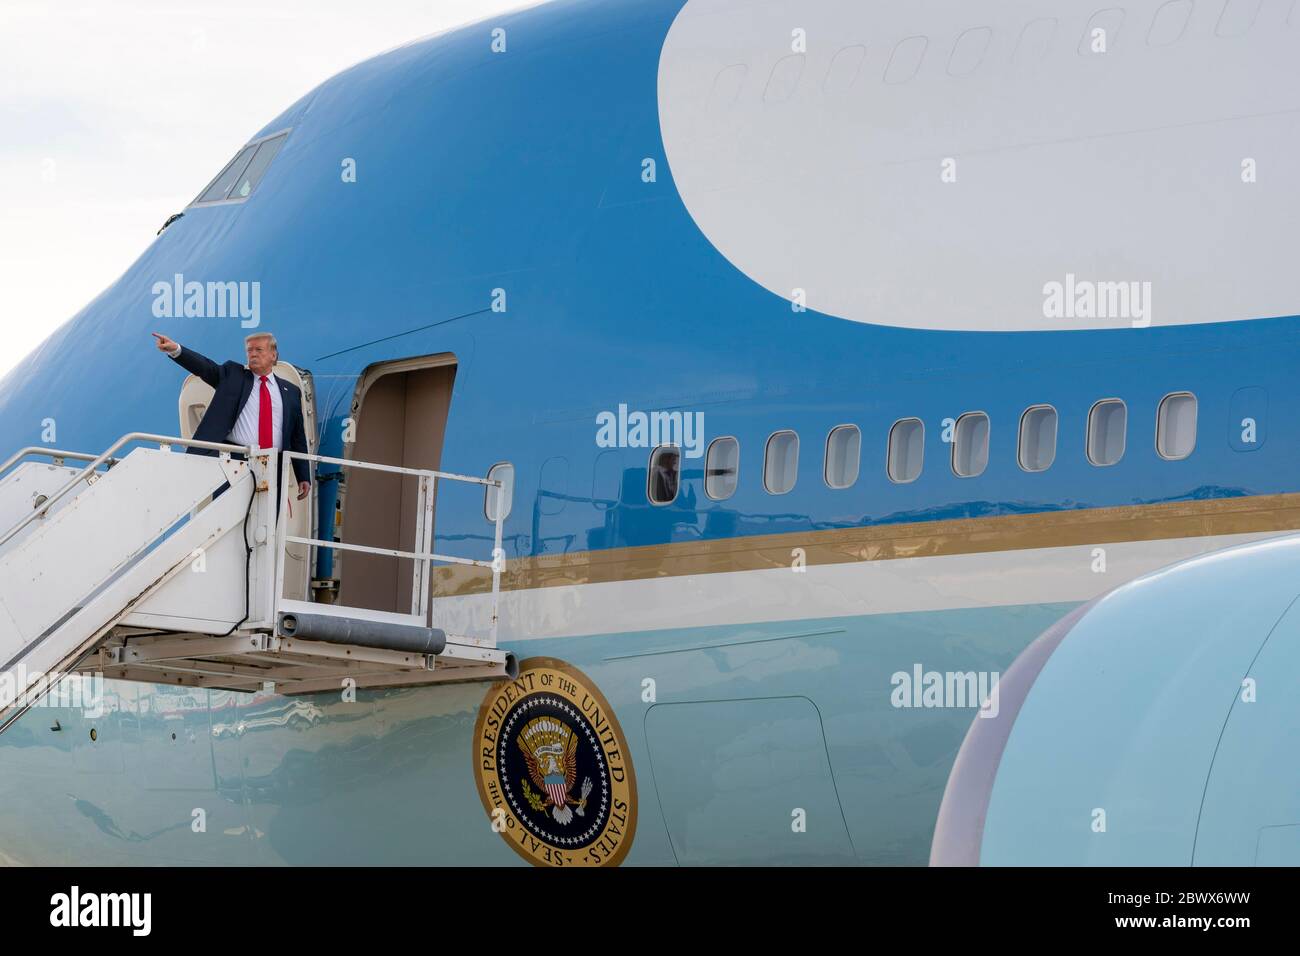 KENNEDY SPACE CENTER, USA -- 30 May 2020 -- US President Donald J. Trump bids farewell from Air Force One following the launch of a SpaceX Falcon 9 ro Stock Photo